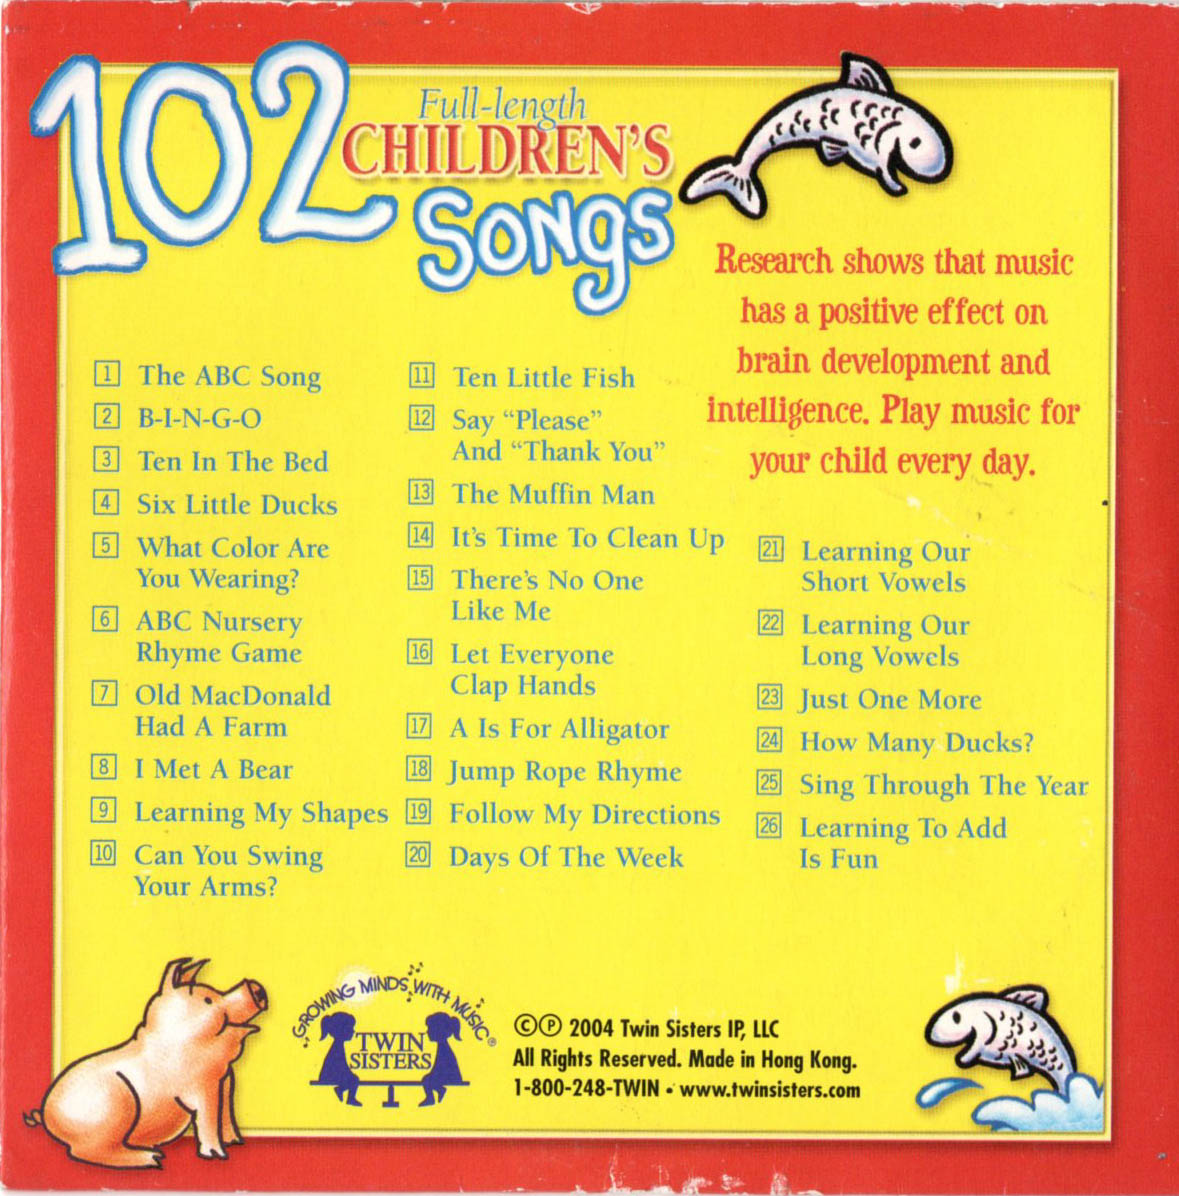 102 FULL-LENGTH CHILDREN'S SONGS: VOL. ONE - Twin Sisters CD